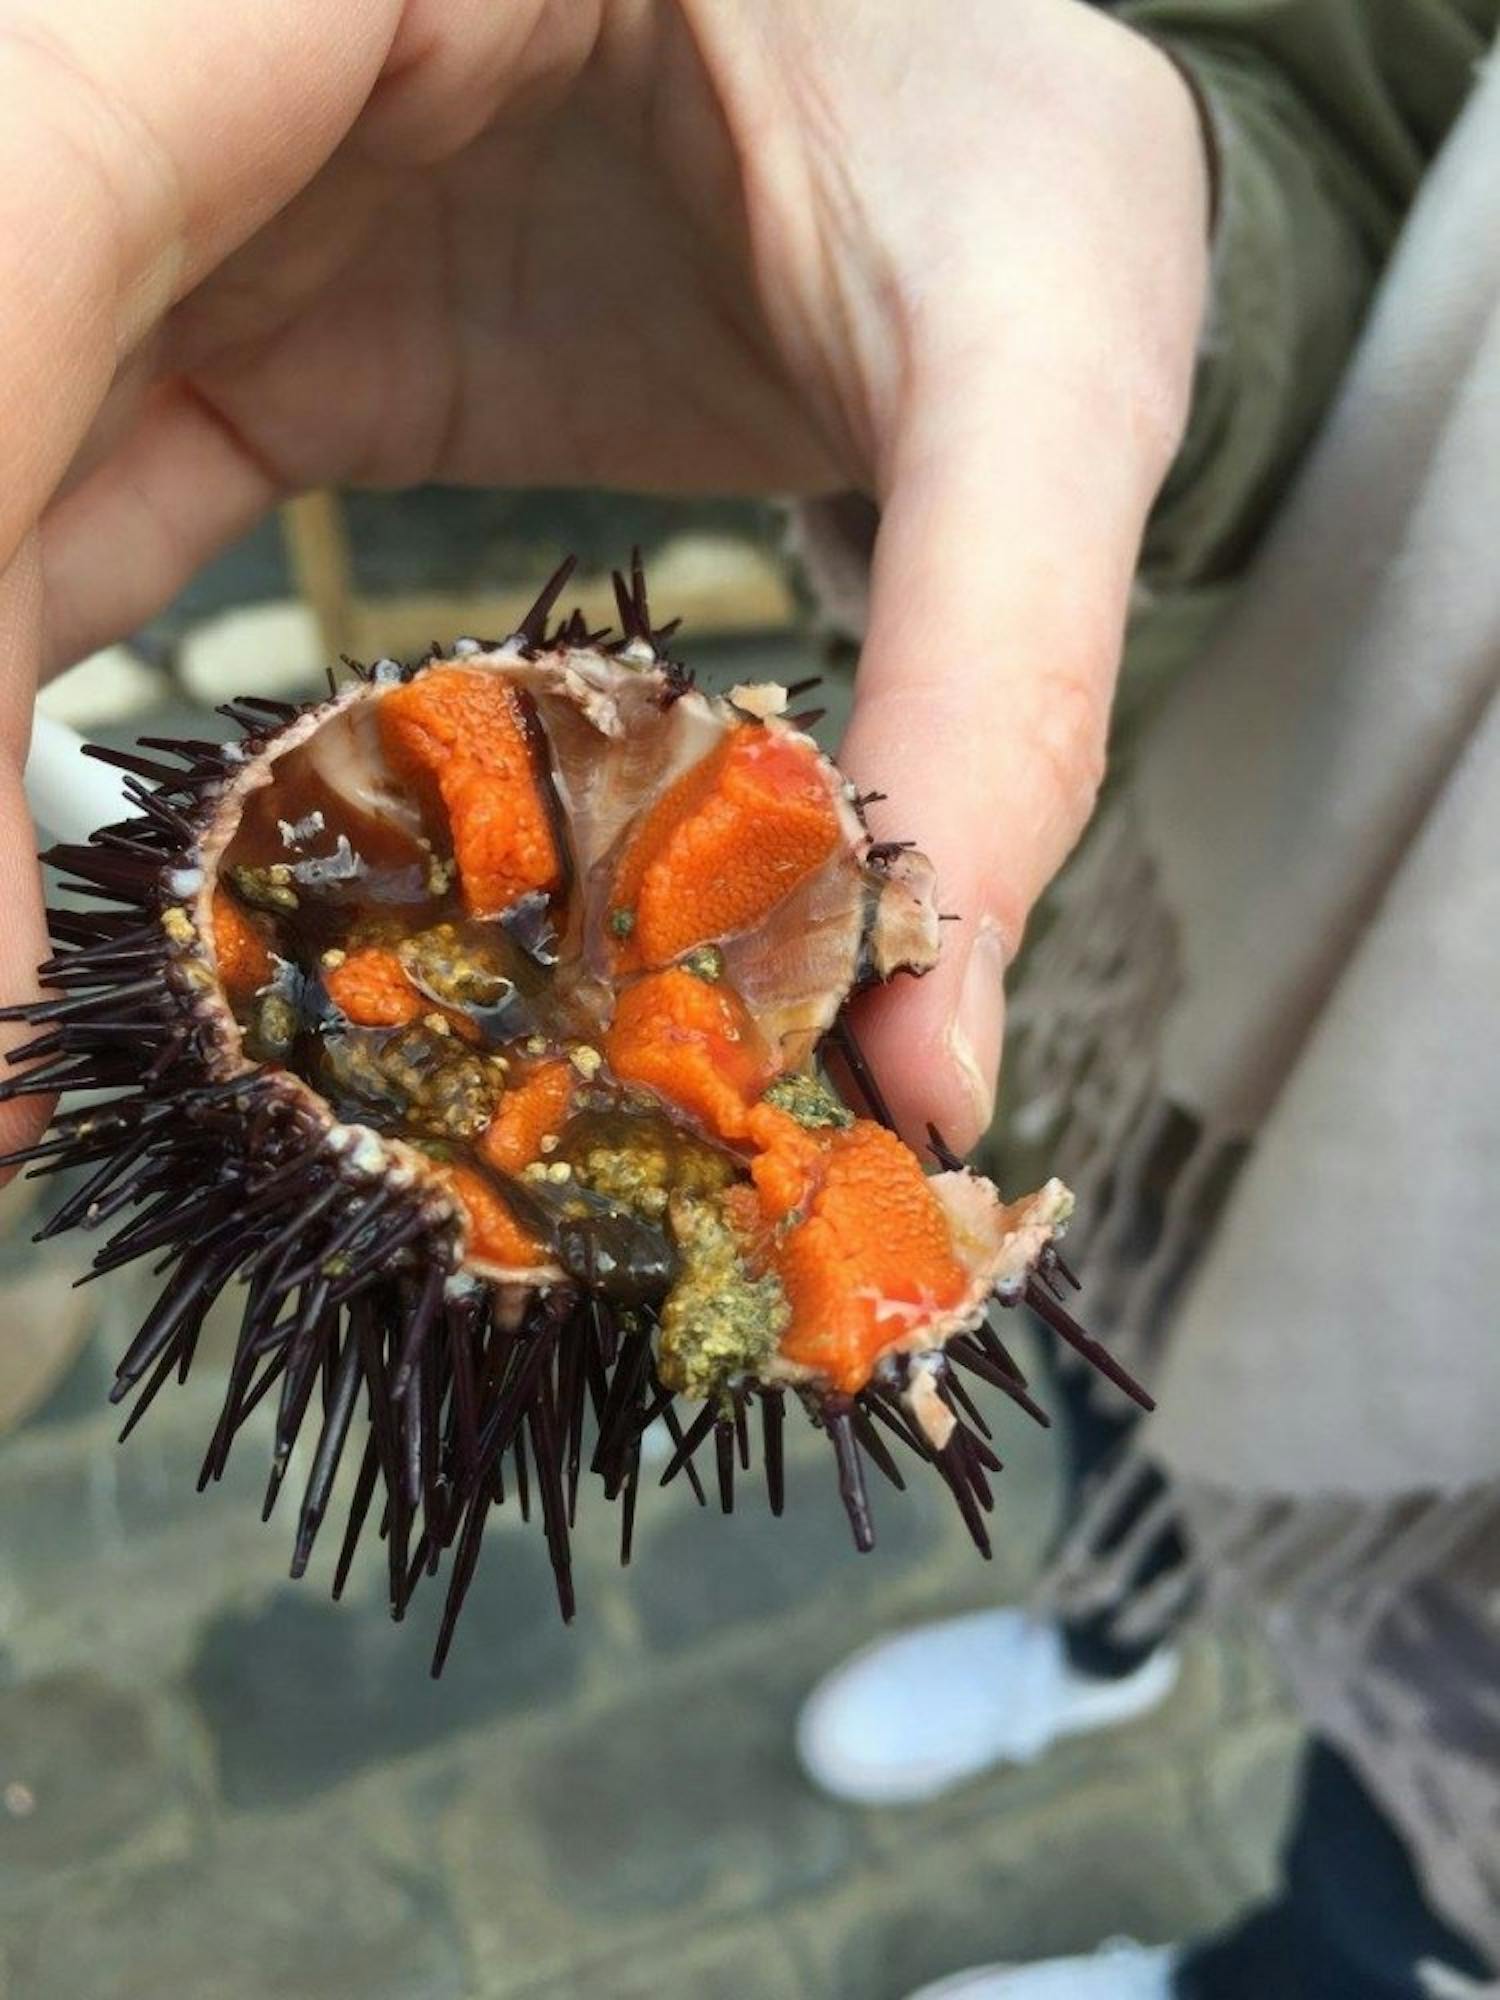 A sea urchin is cut open to expose the edible meat at the center. Booths offering fresh sea urchins and oysters populated the streets of Cadiz, Spain.